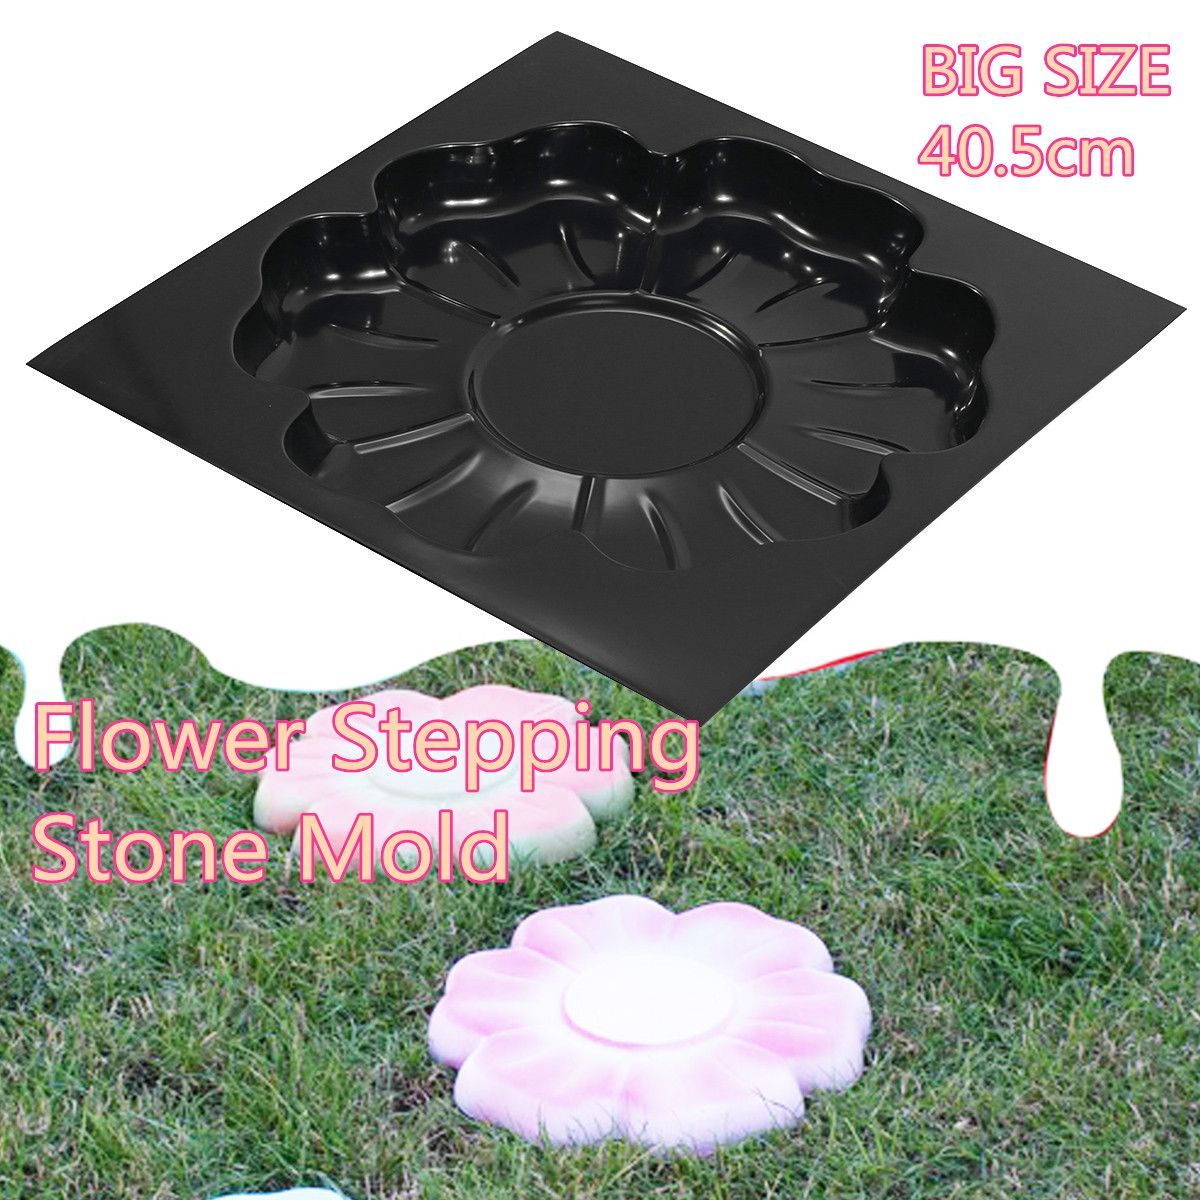 DIY-Multi-function-Plastic-Paving-Road-Maker-Mold-Flower-Stepping-Stone-Cement-Brick-Mold-1537538